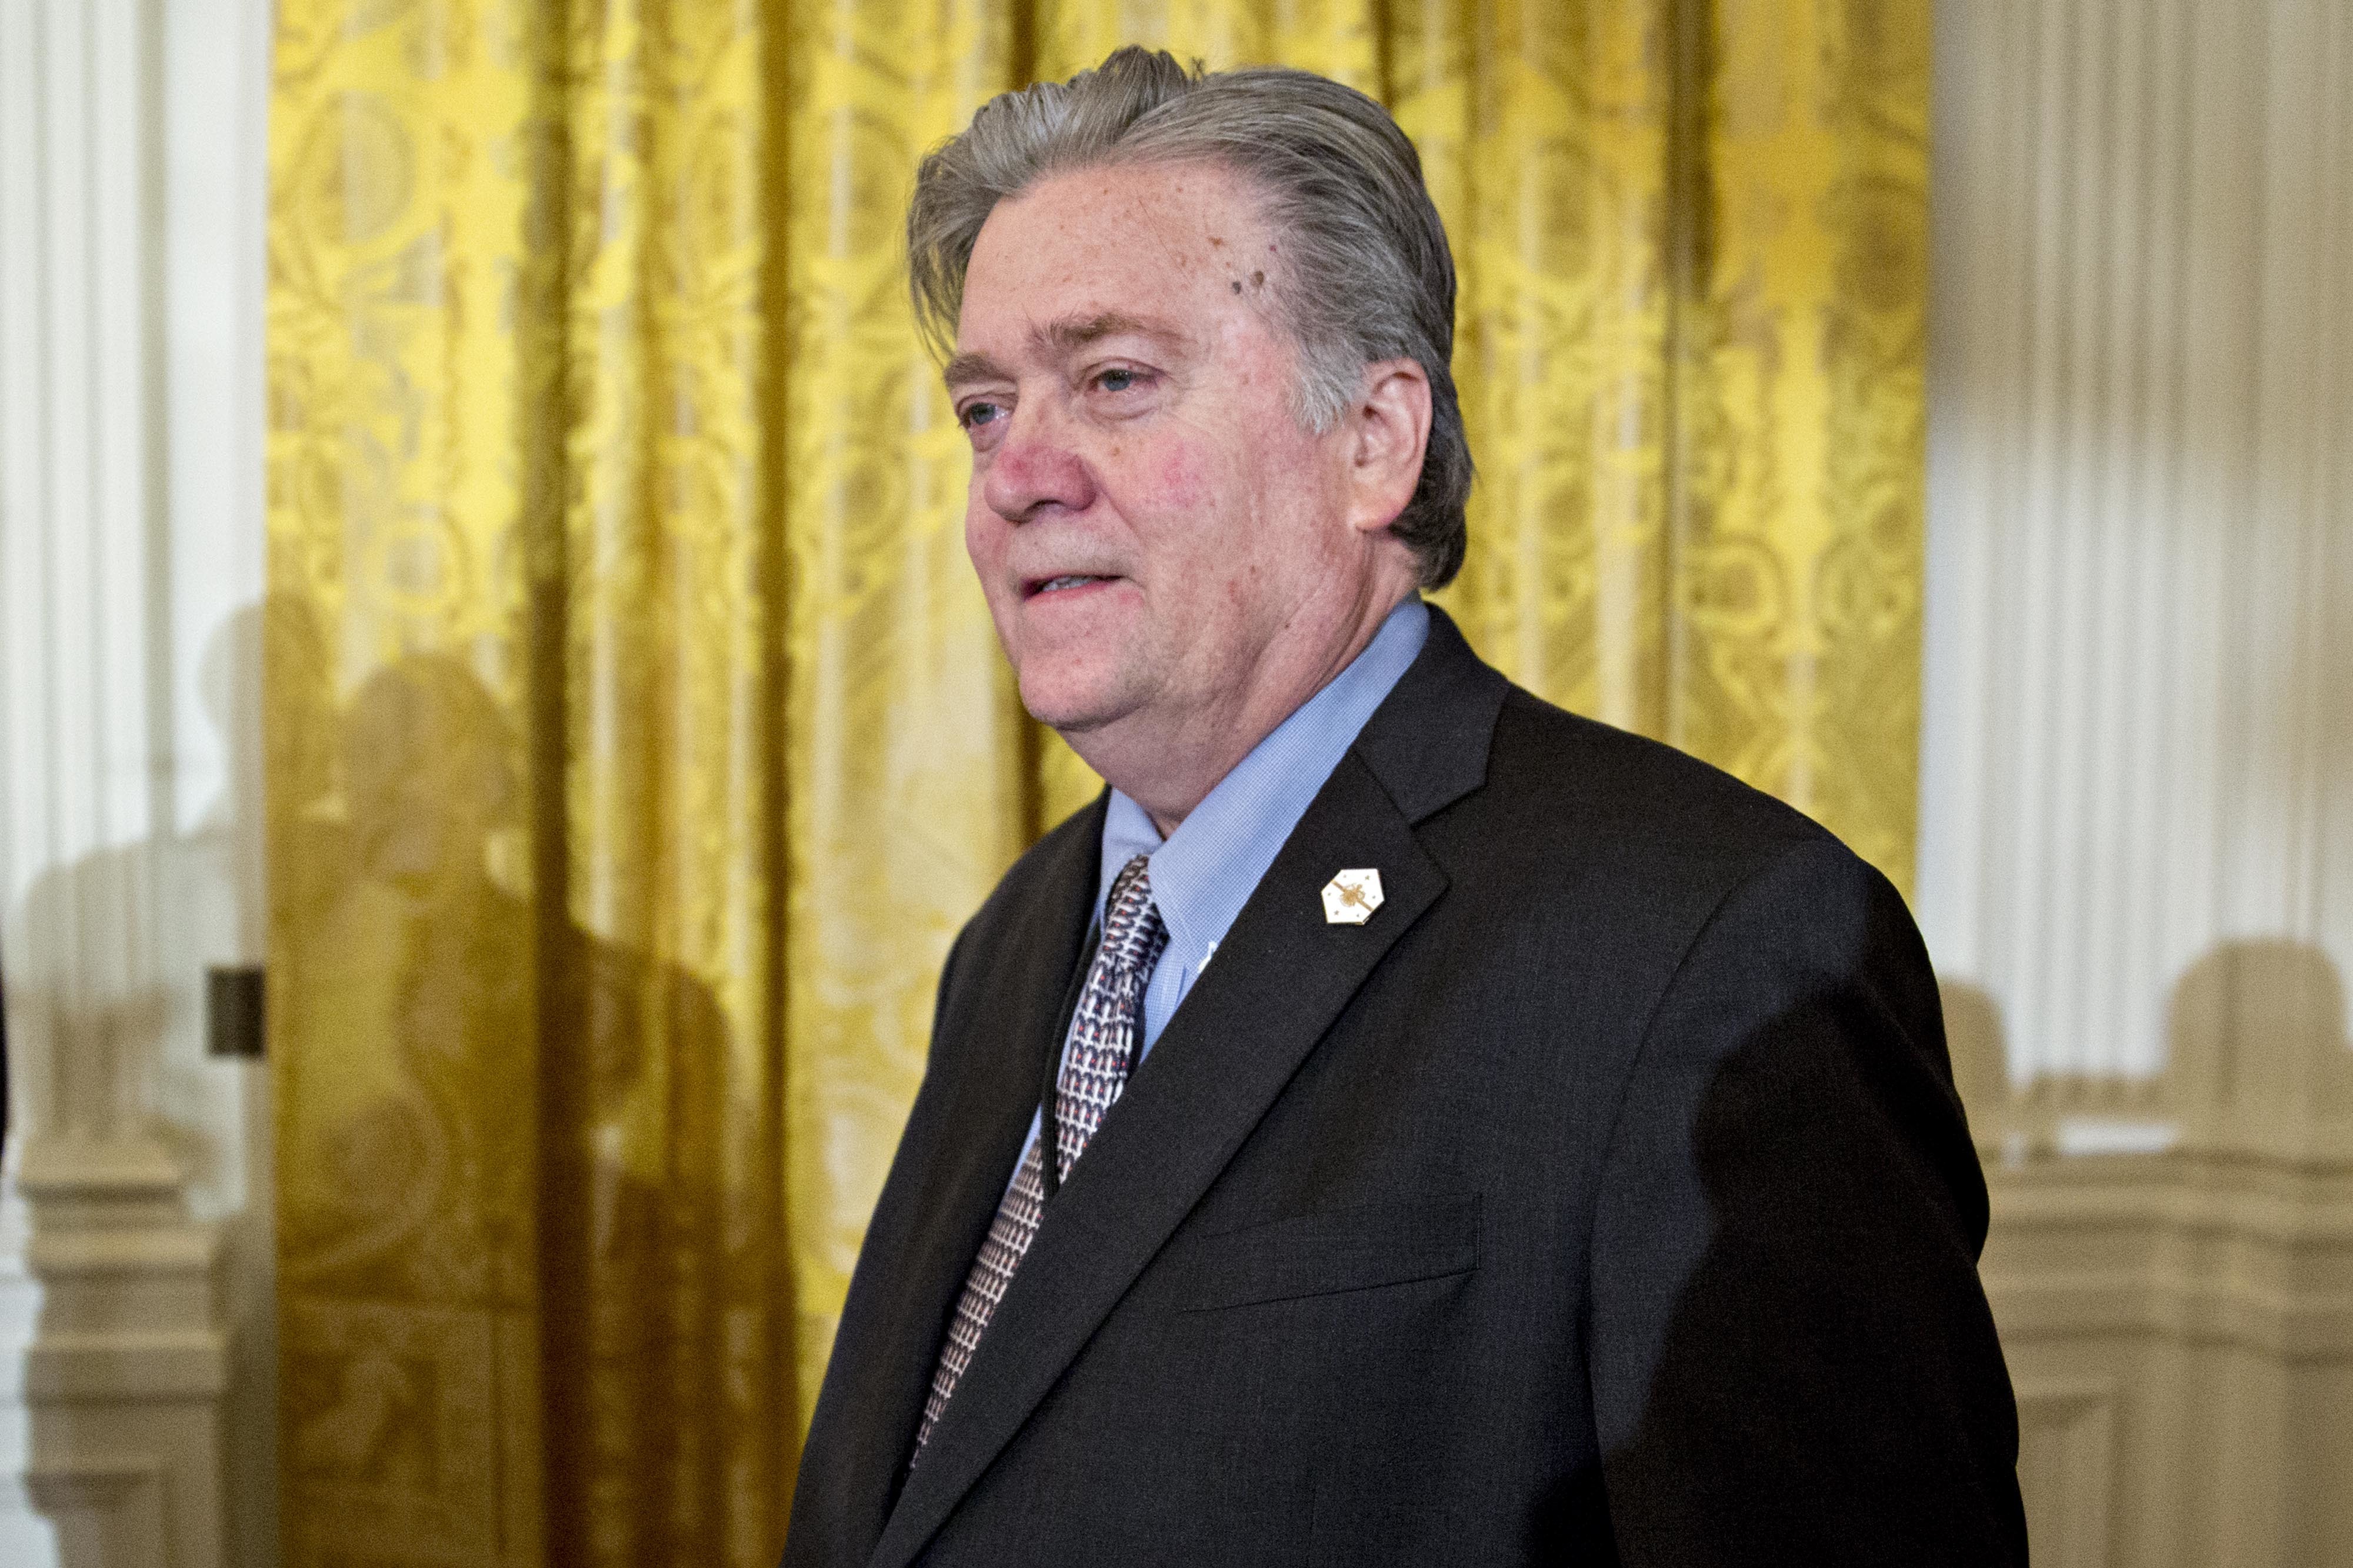 Stephen "Steve" Bannon, chief strategist for U.S. President Donald Trump, arrives to a swearing in ceremony of White House senior staff in the East Room of the White House in Washington, D.C., U.S., on Sunday, Jan. 22, 2017. Trump today mocked protesters who gathered for large demonstrations across the U.S. and the world on Saturday to signal discontent with his leadership, but later offered a more conciliatory tone, saying he recognized such marches as a Òhallmark of our democracy.Ó (Photo by Andrew Harrer/Pool) *** Please Use Credit from Credit Field ***